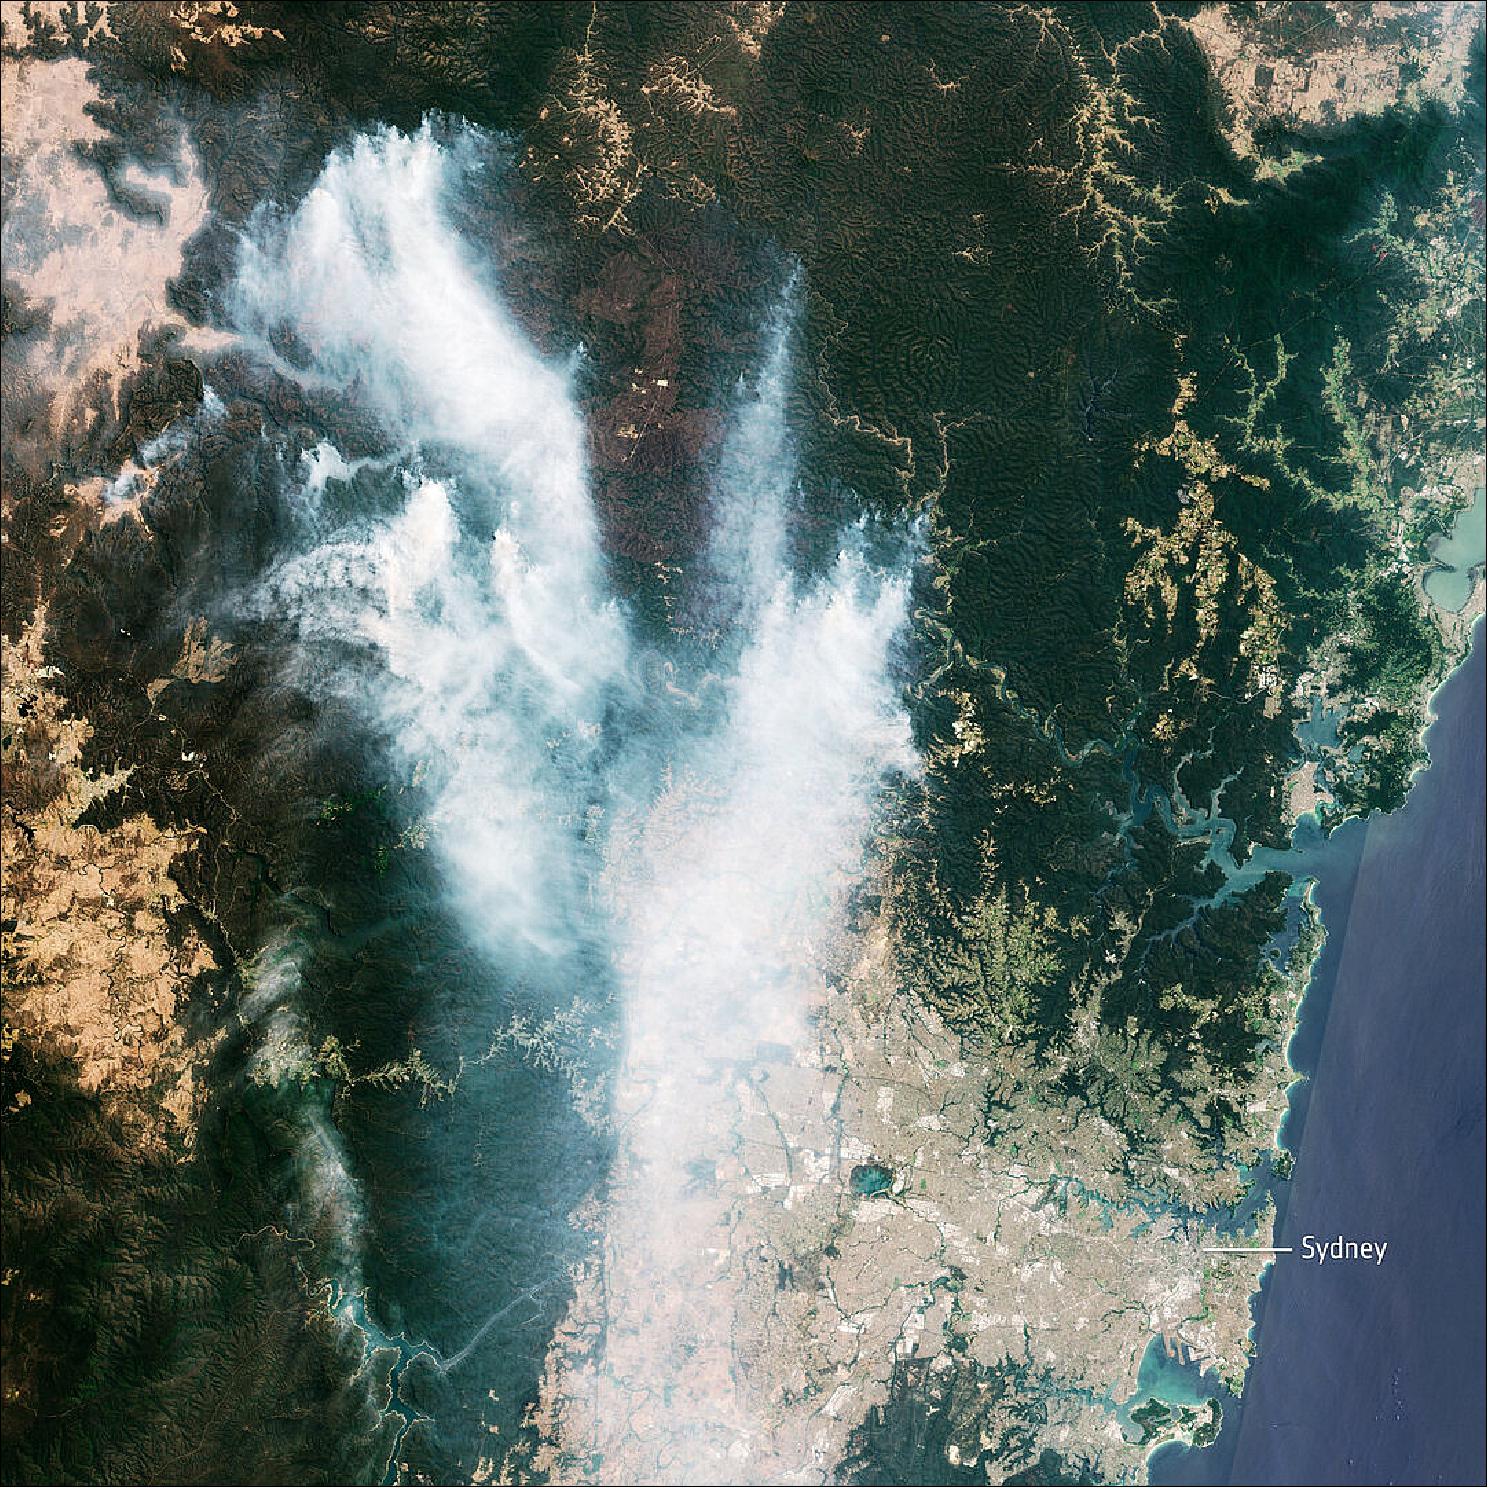 Figure 6: In this image, captured on 21 November 2019 at 00:02 GMT (11:02 local time), smoke from the Gospers Mountain bushfires, northwest of Sydney, can be seen drifting southwards. Residents with respiratory conditions were advised by authorities to stay indoors, as over 50 people have been treated owing to complications from the smoke (image credit: ESA, the image contains modified Copernicus Sentinel data (2019), processed by ESA, CC BY-SA 3.0 IGO)